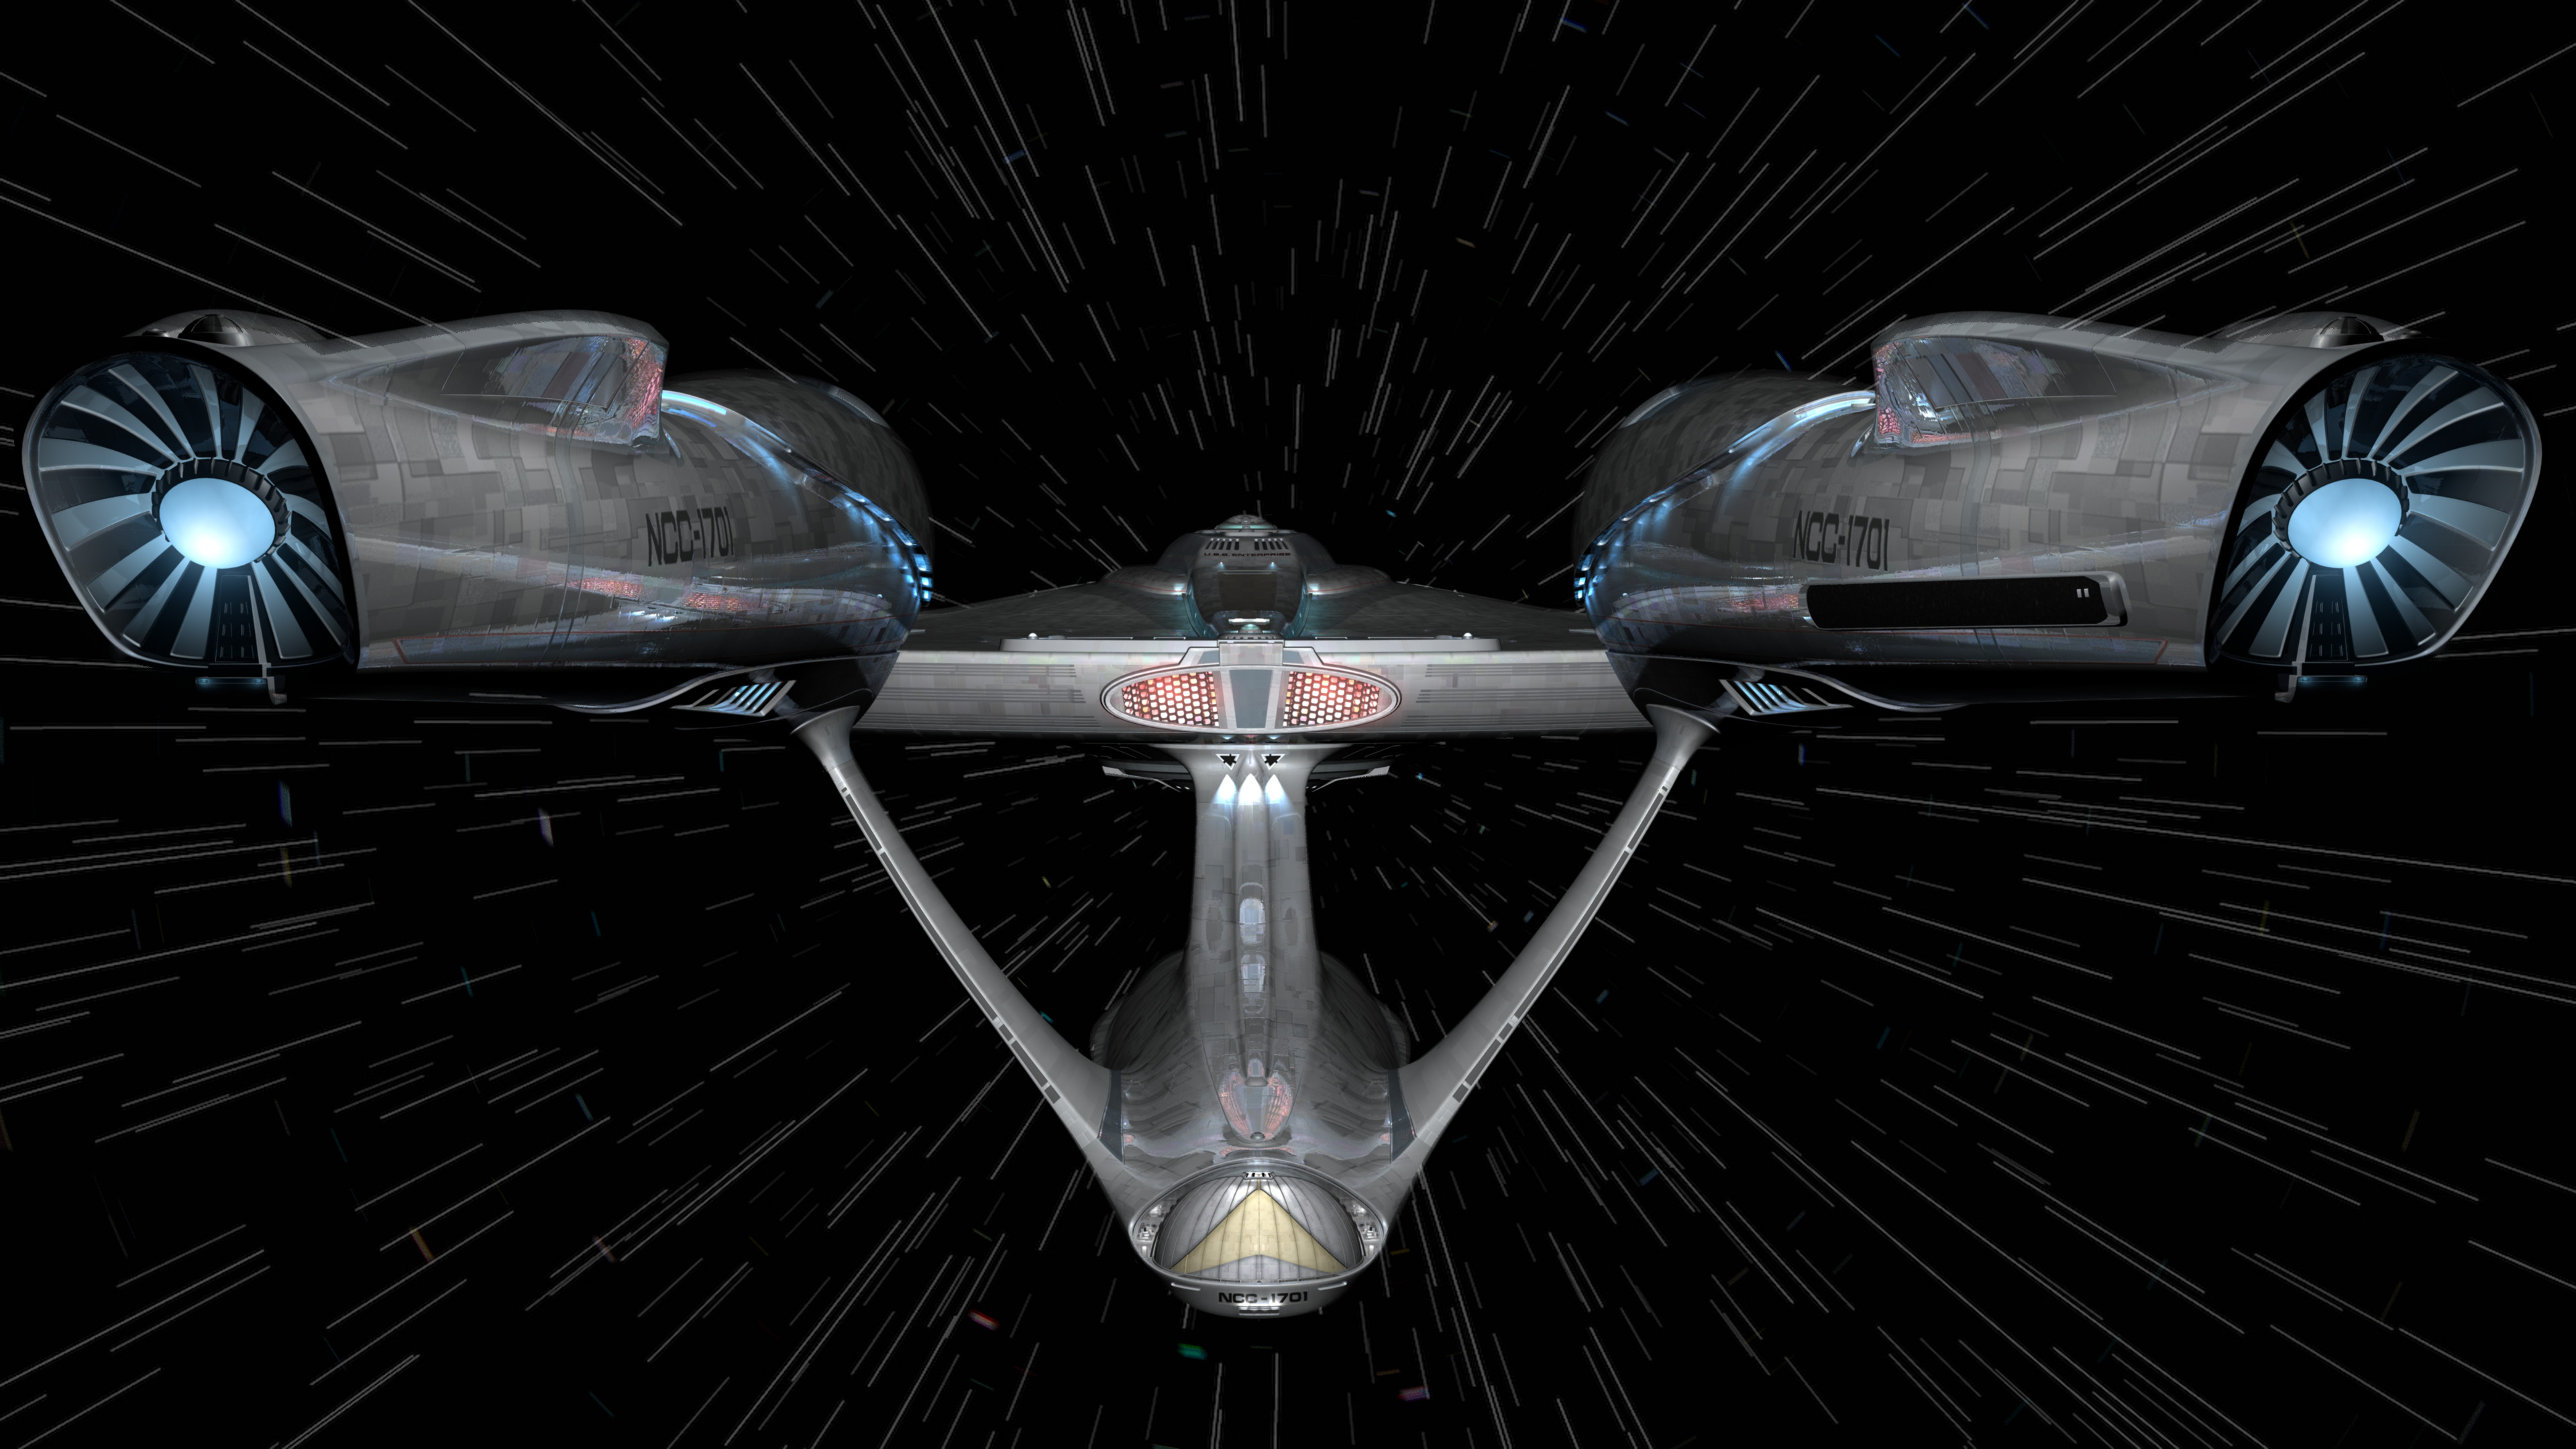 3840x2160 Ncc 1701 Wallpaper (60+ pictures